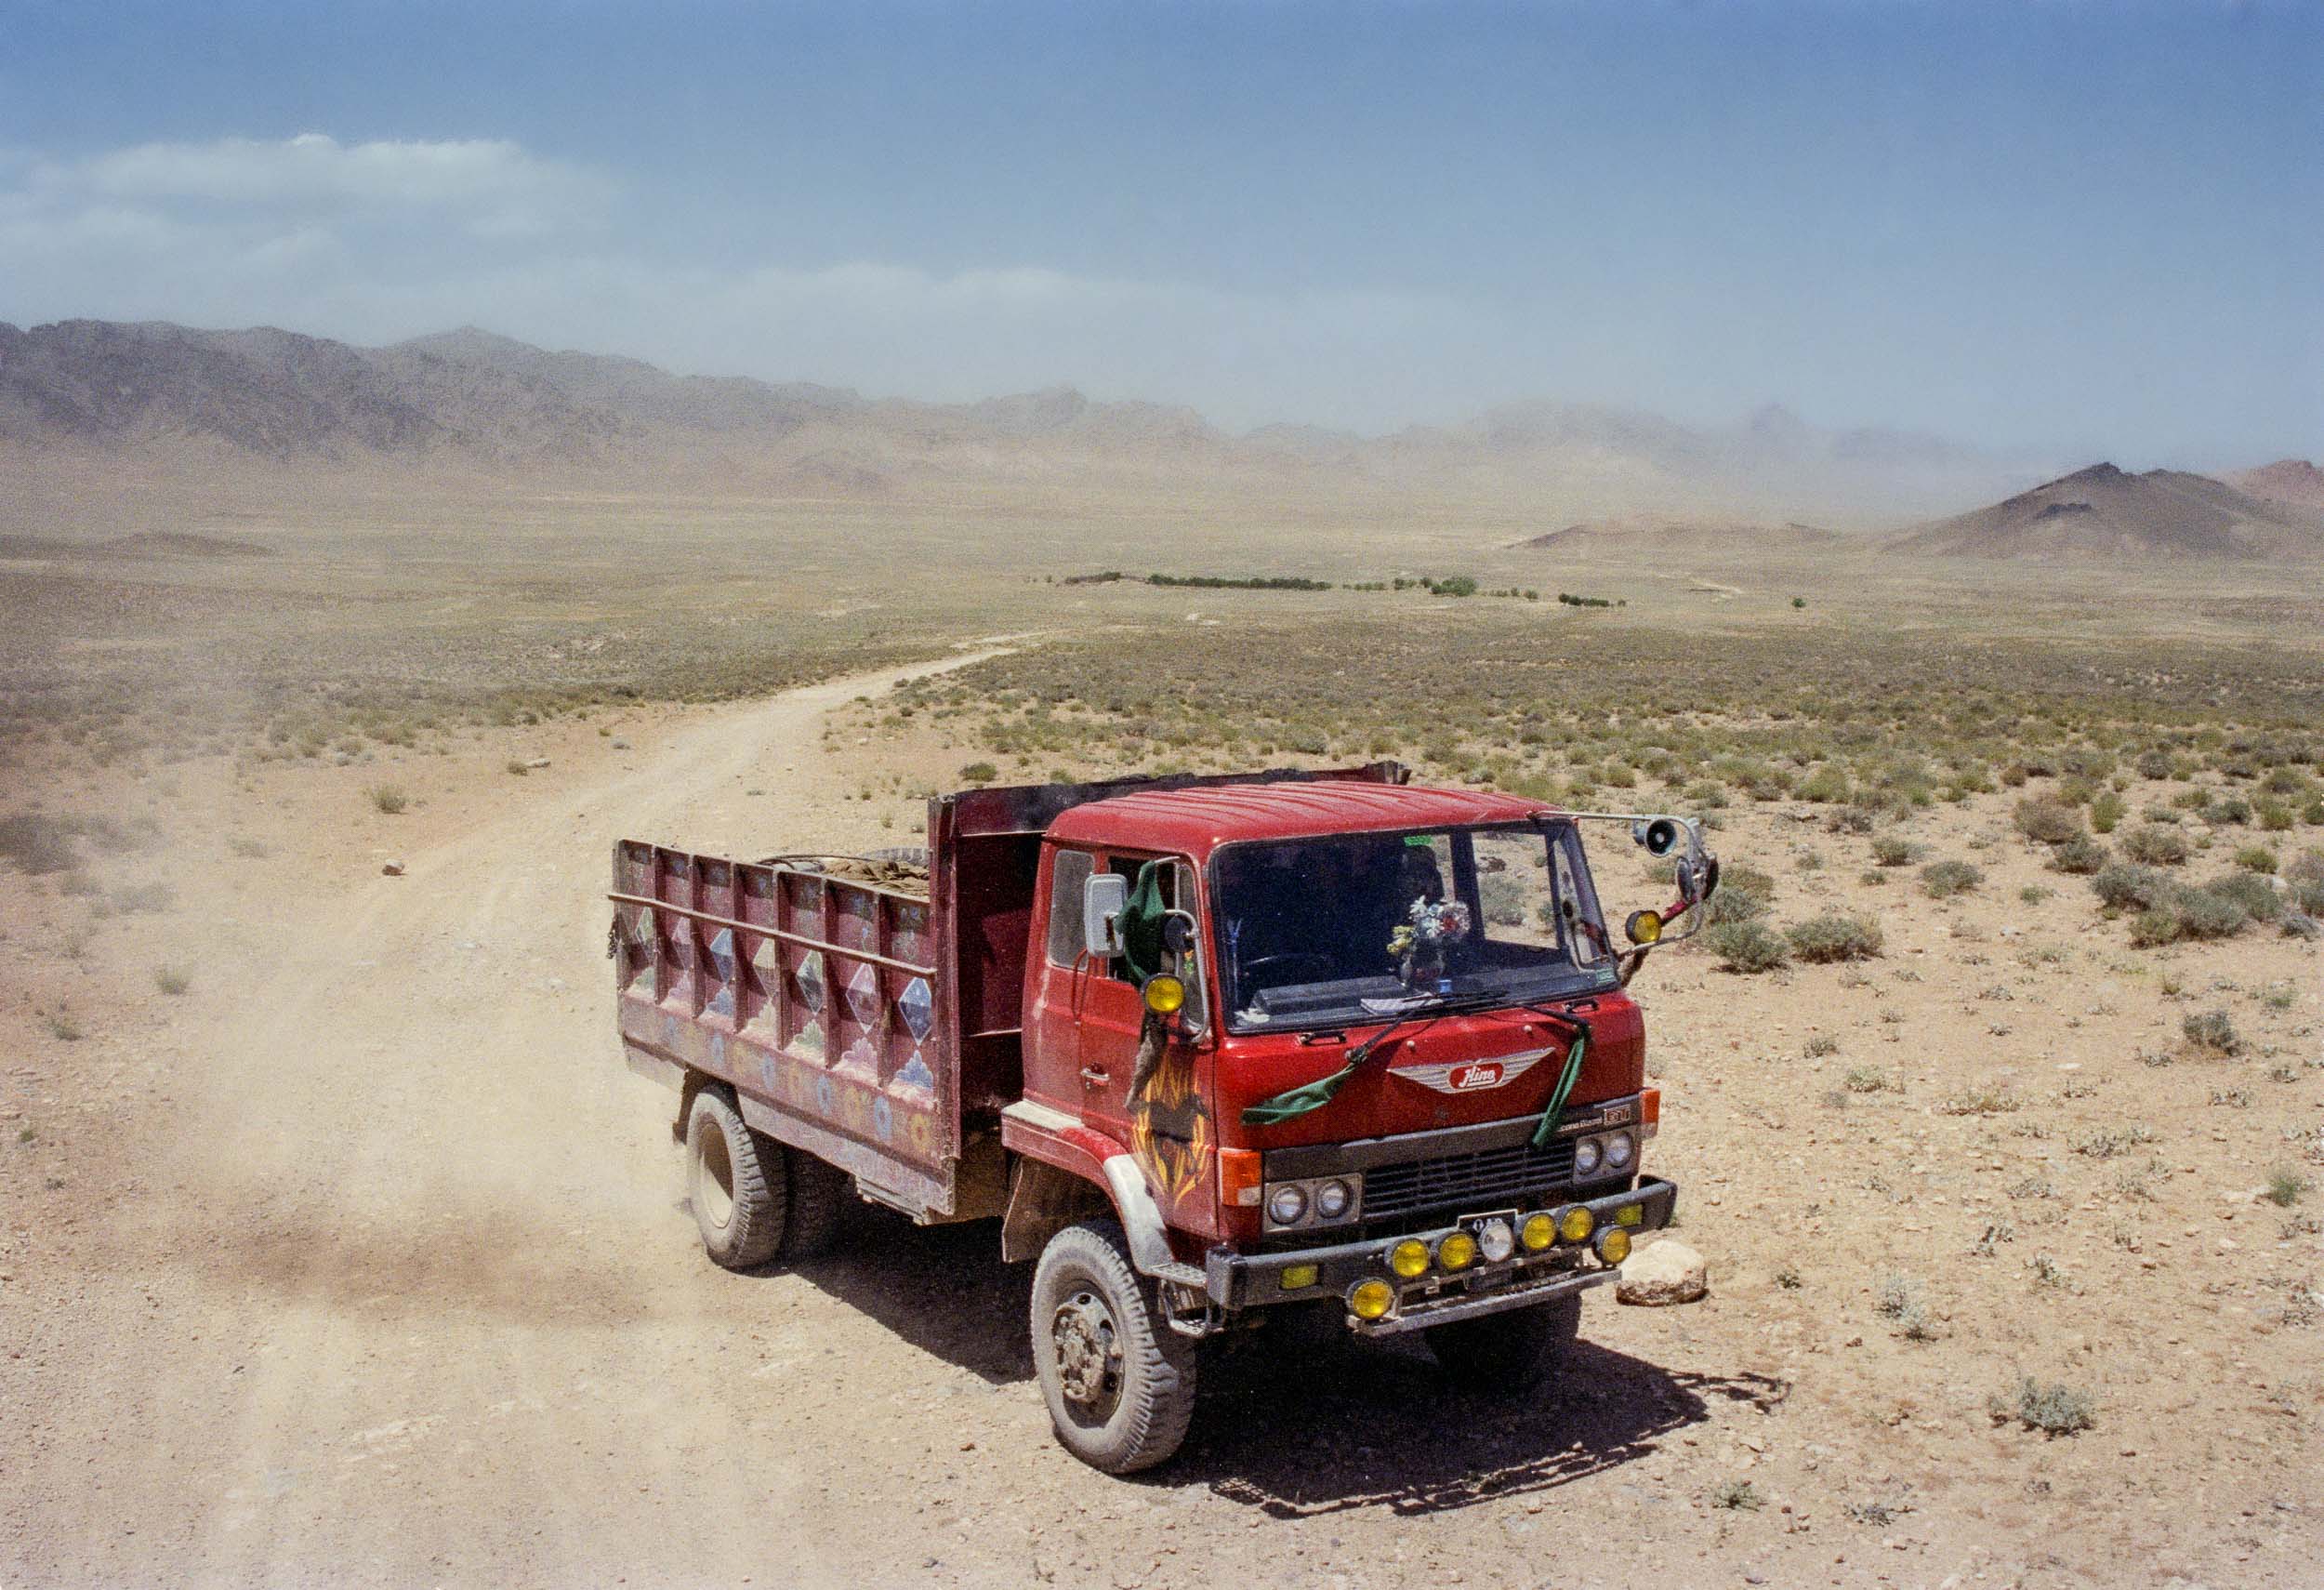 On the Road, Afghanistan 1988